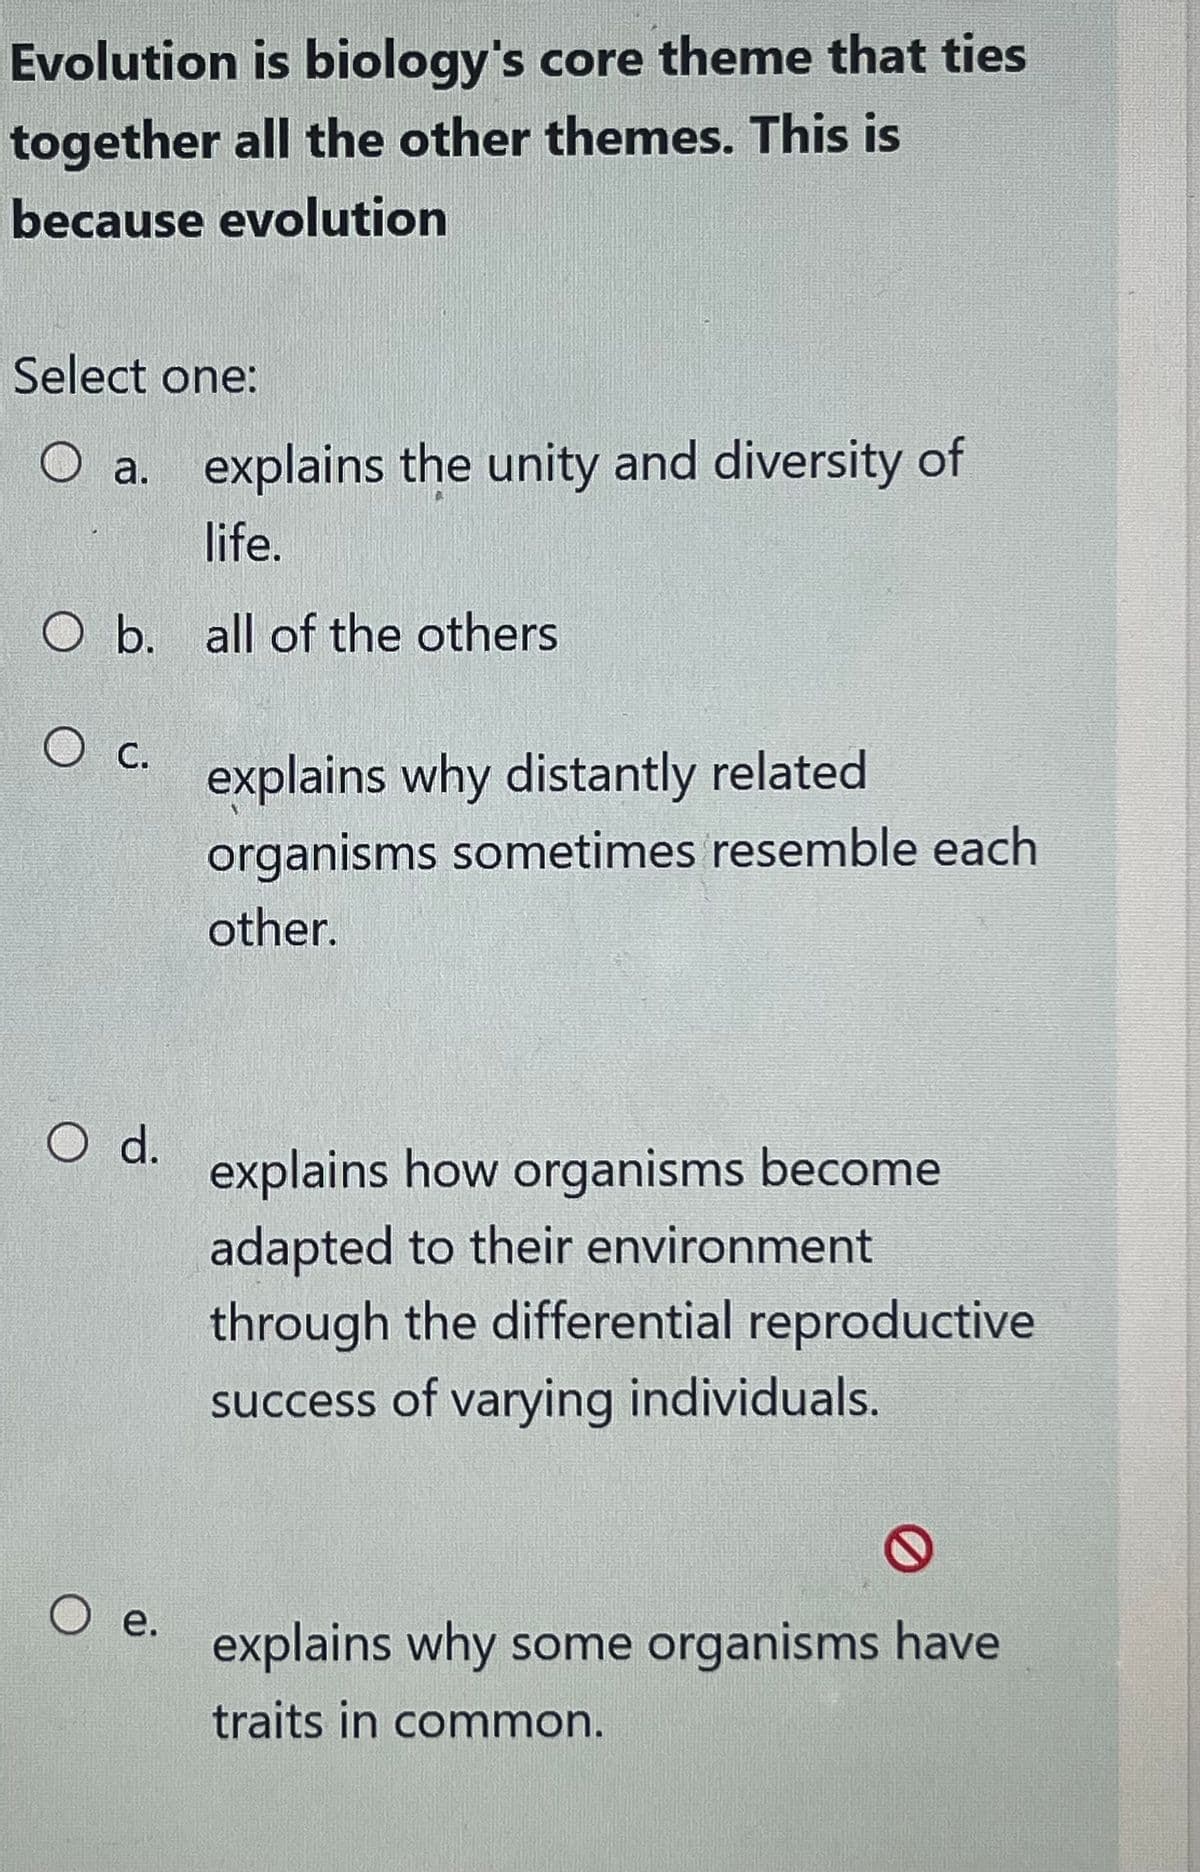 Evolution is biology's core theme that ties
together all the other themes. This is
because evolution
Select one:
O a. explains the unity and diversity of
life.
O b. all of the others
O c.
O d.
O e.
explains why distantly related
organisms sometimes resemble each
other.
explains how organisms become
adapted to their environment.
through the differential reproductive
success of varying individuals.
explains why some organisms have
traits in common.